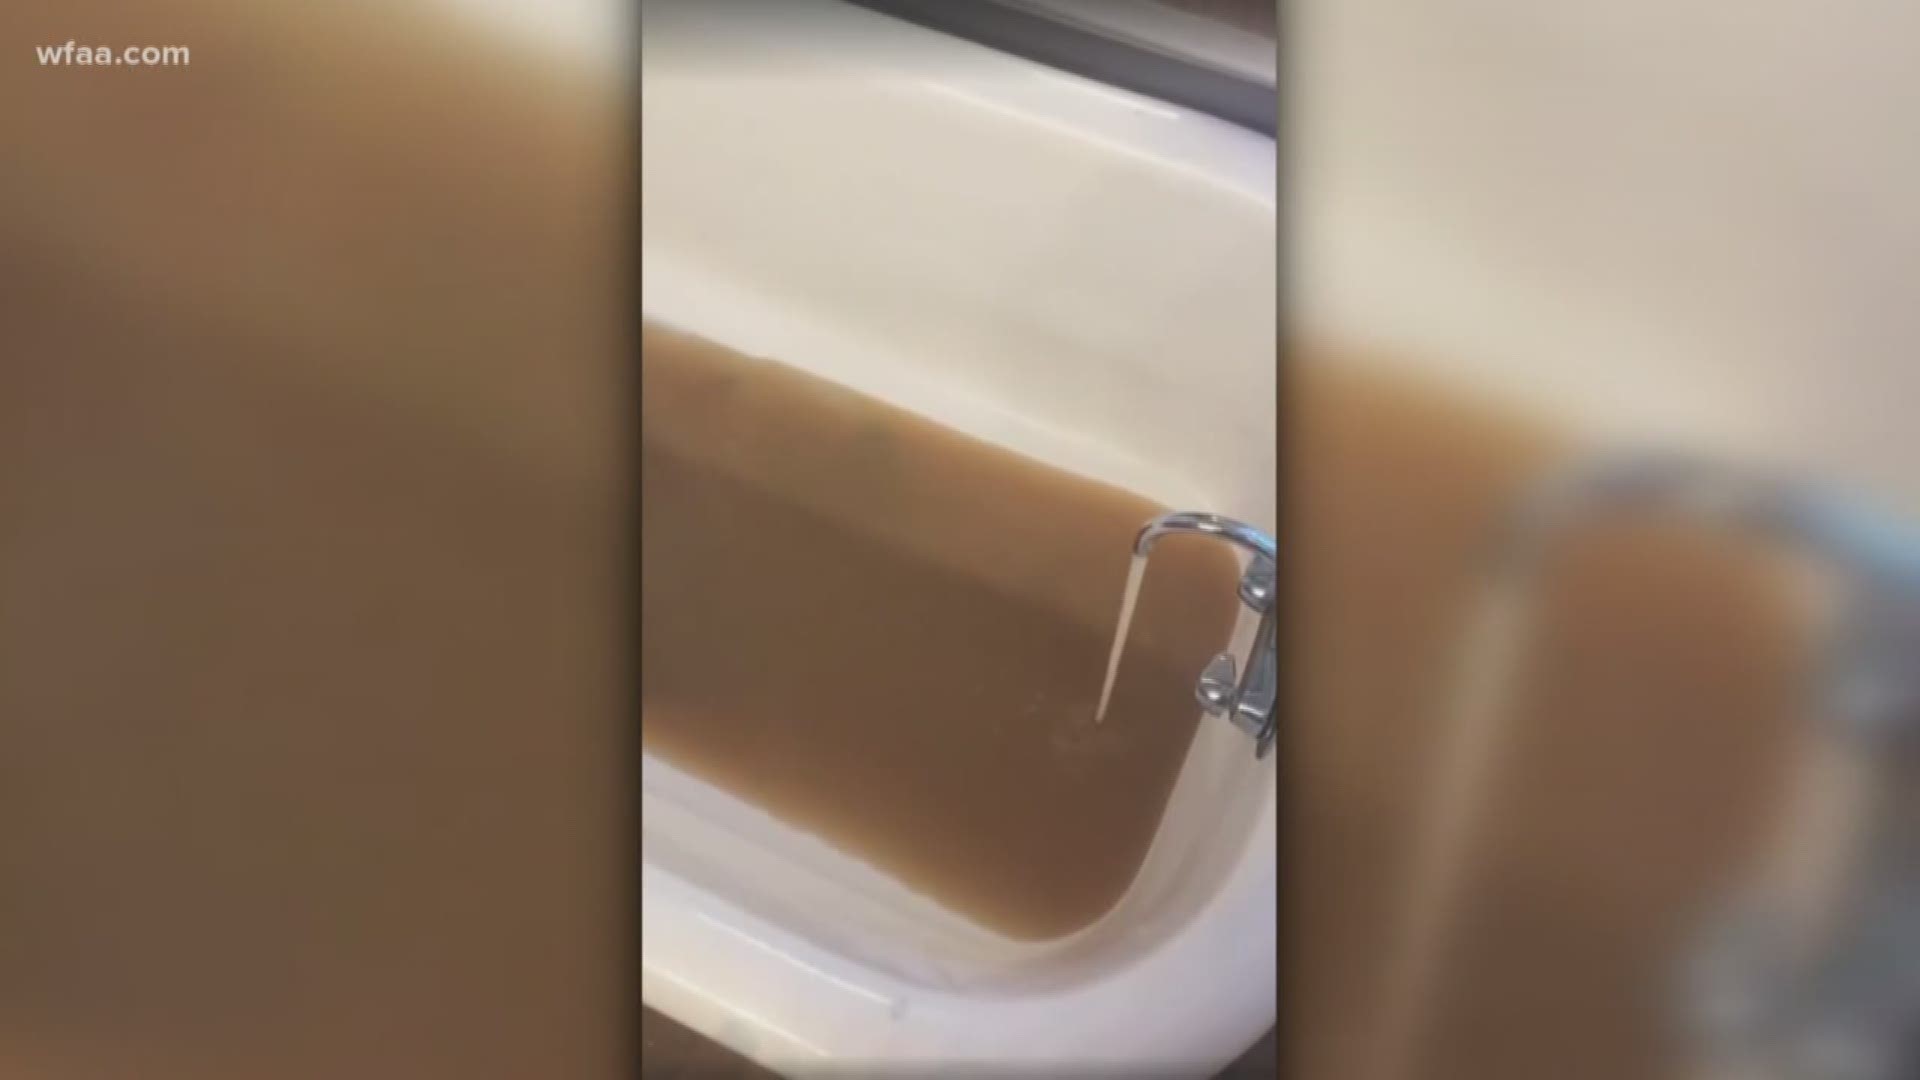 Complaints of brown water